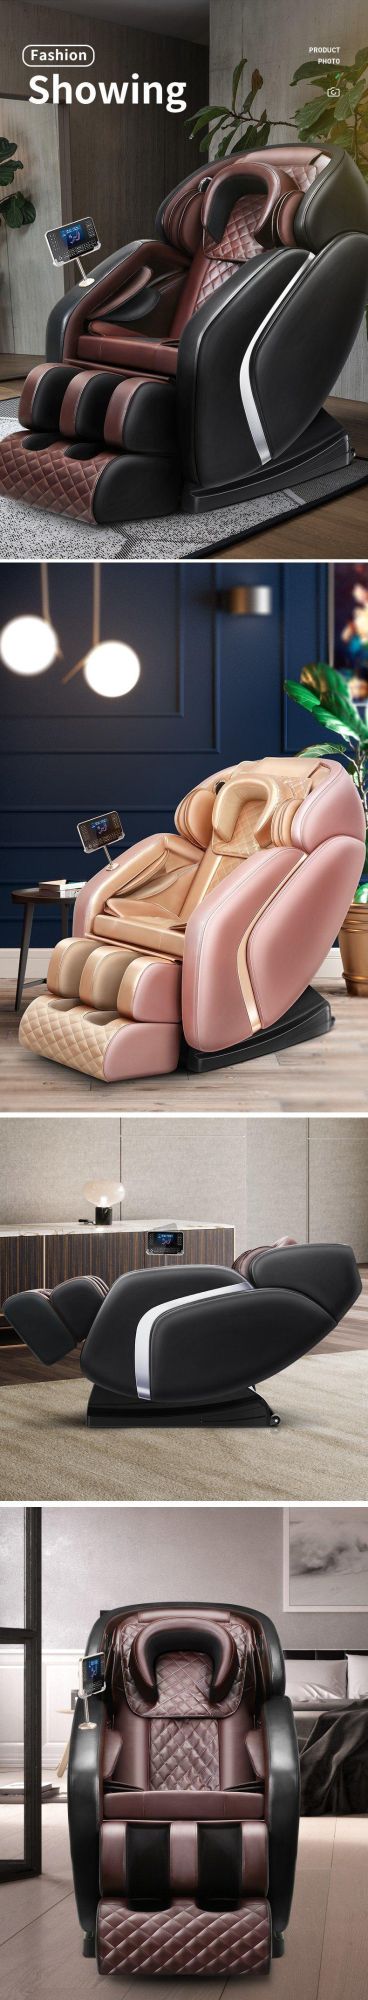 Hot 4D Electric Multi-Function Zero Gravity Heat and Massage Office Chairs